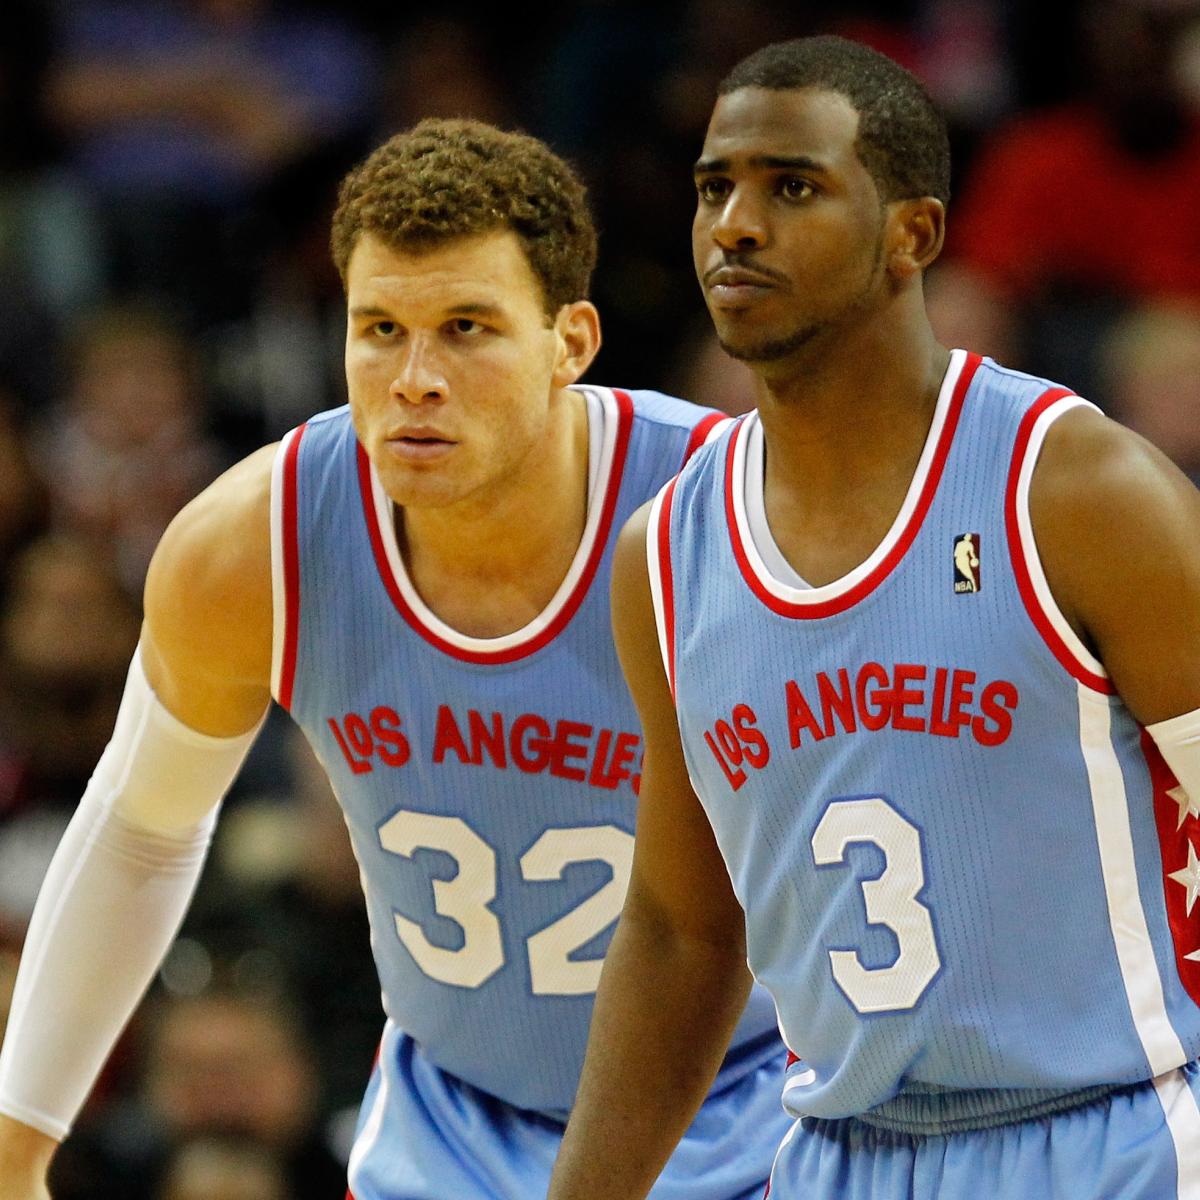 Chris Paul Remembers Blake Griffin And The Lob City Clippers: I Don't  Think Anybody Has Been As Explosive. - Fadeaway World